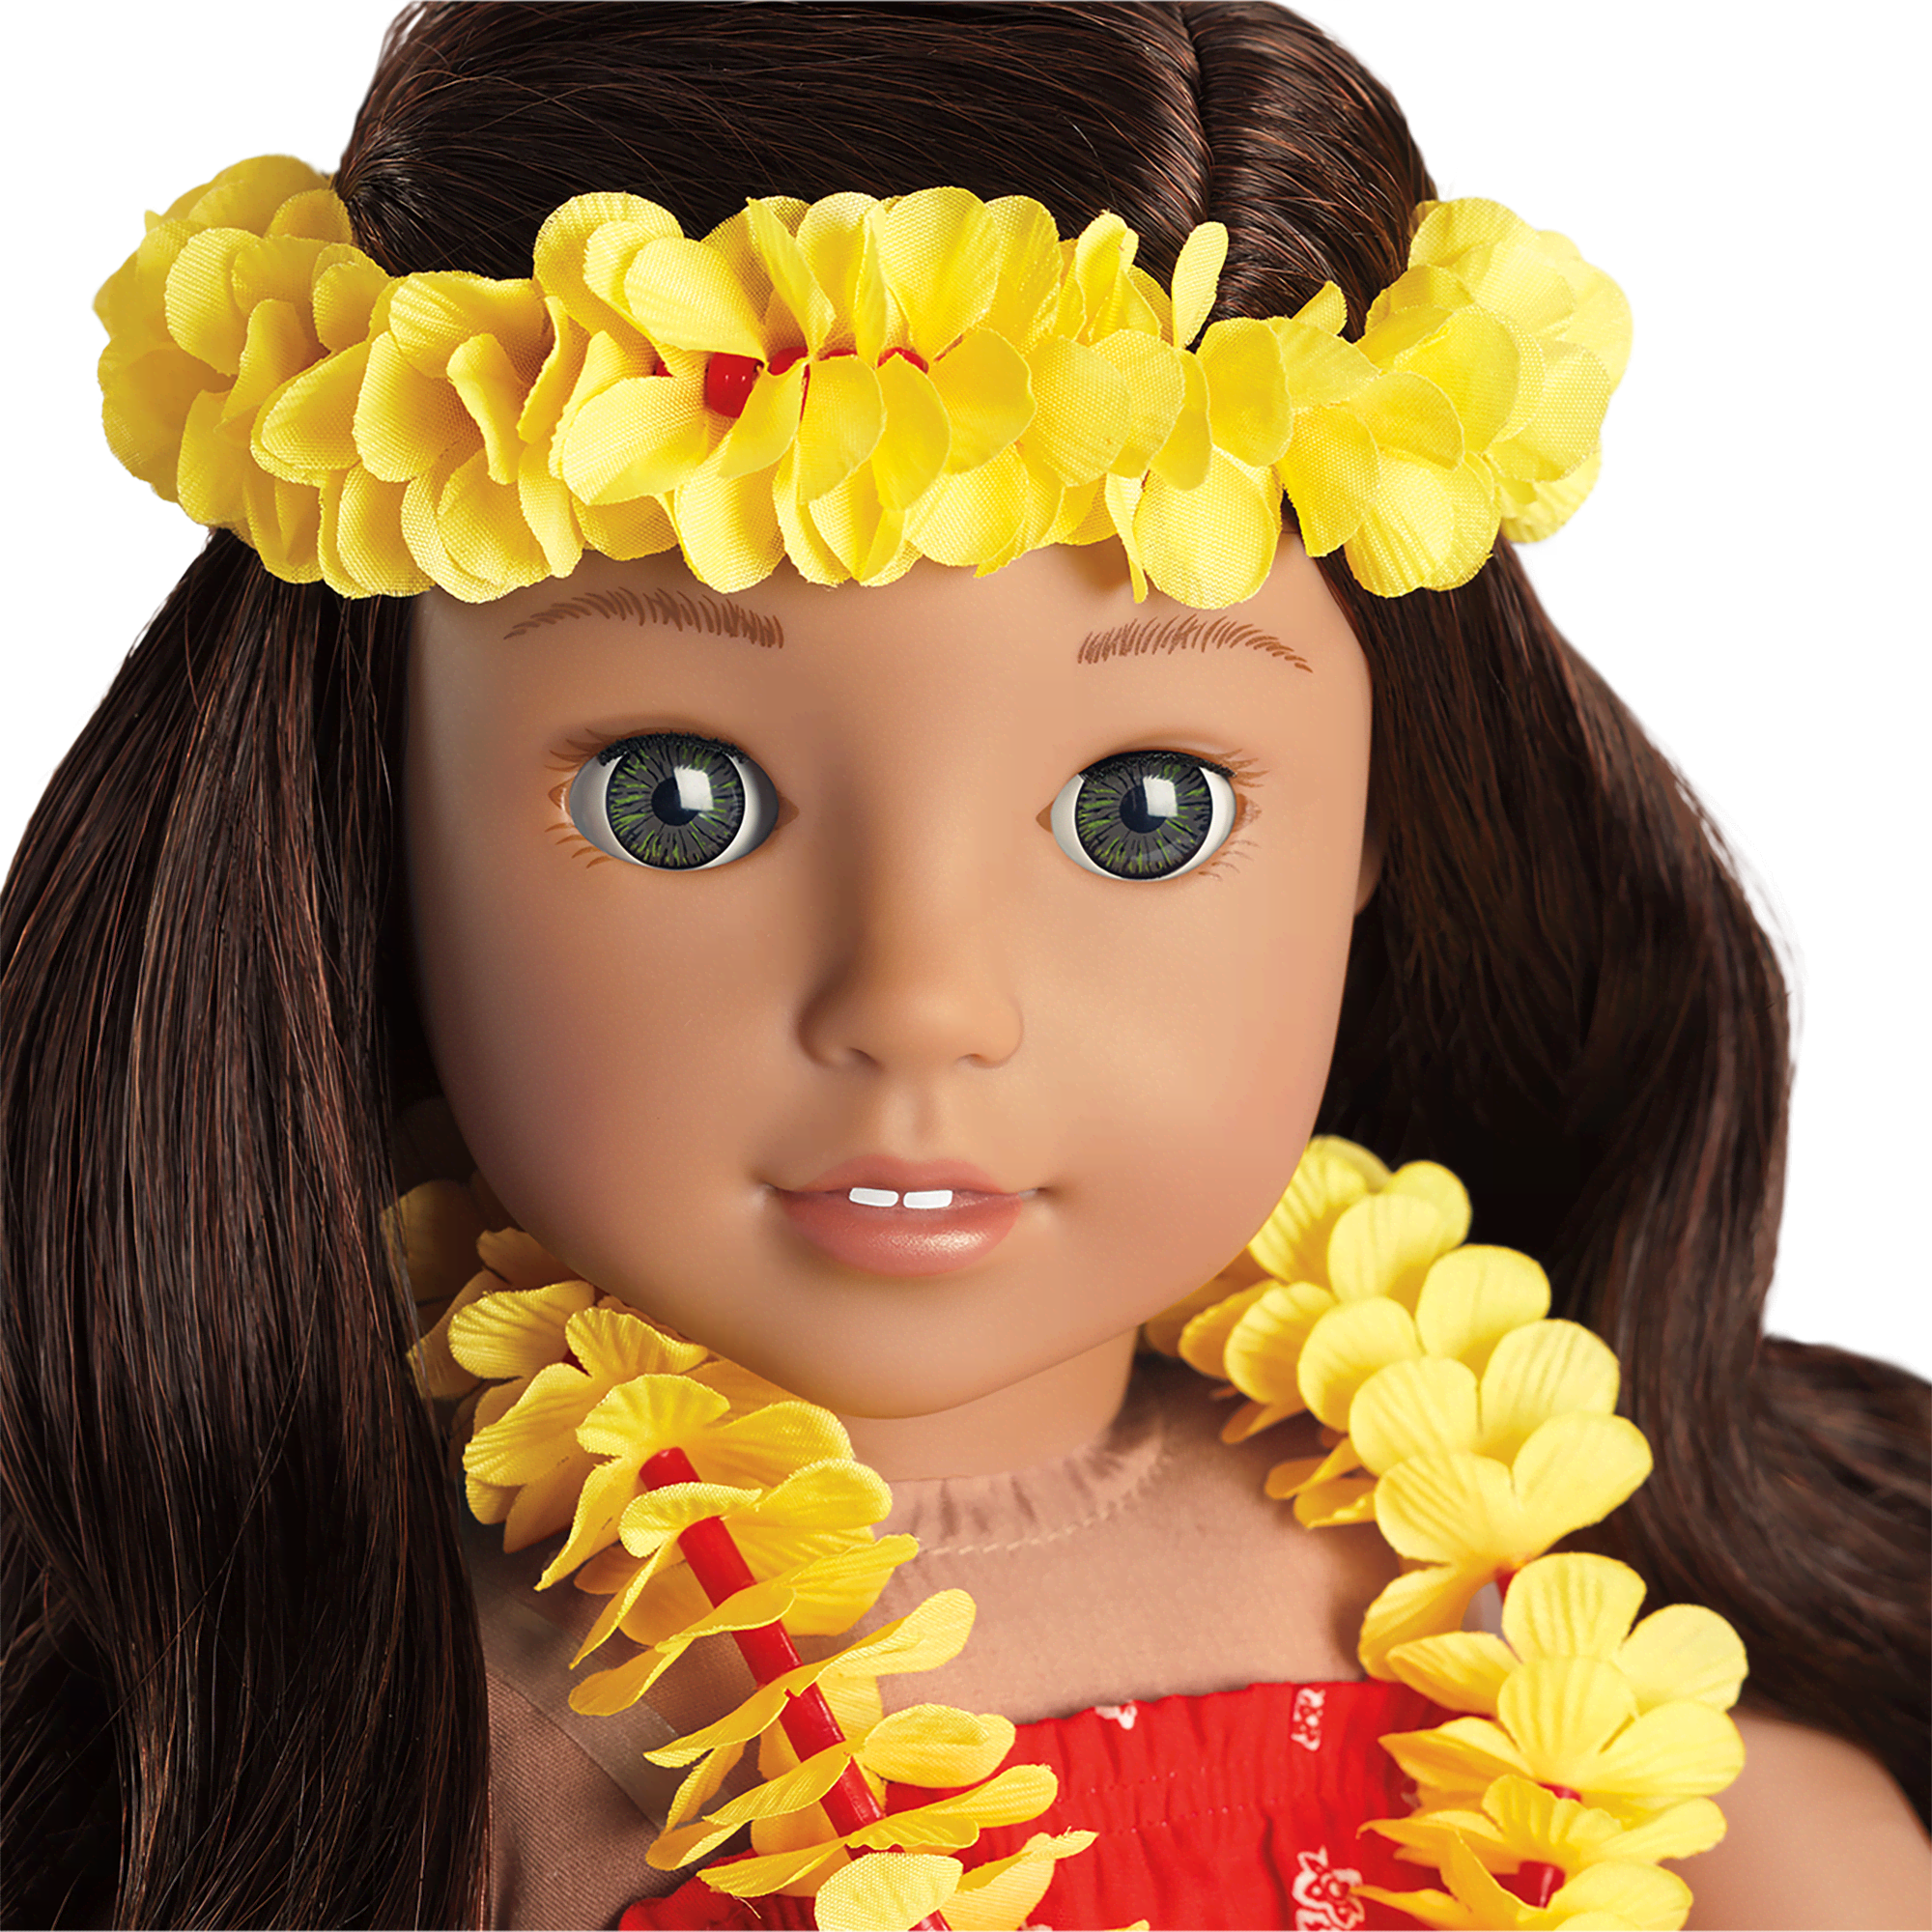 Nanea's™ Hula Outfit for 18-inch Dolls